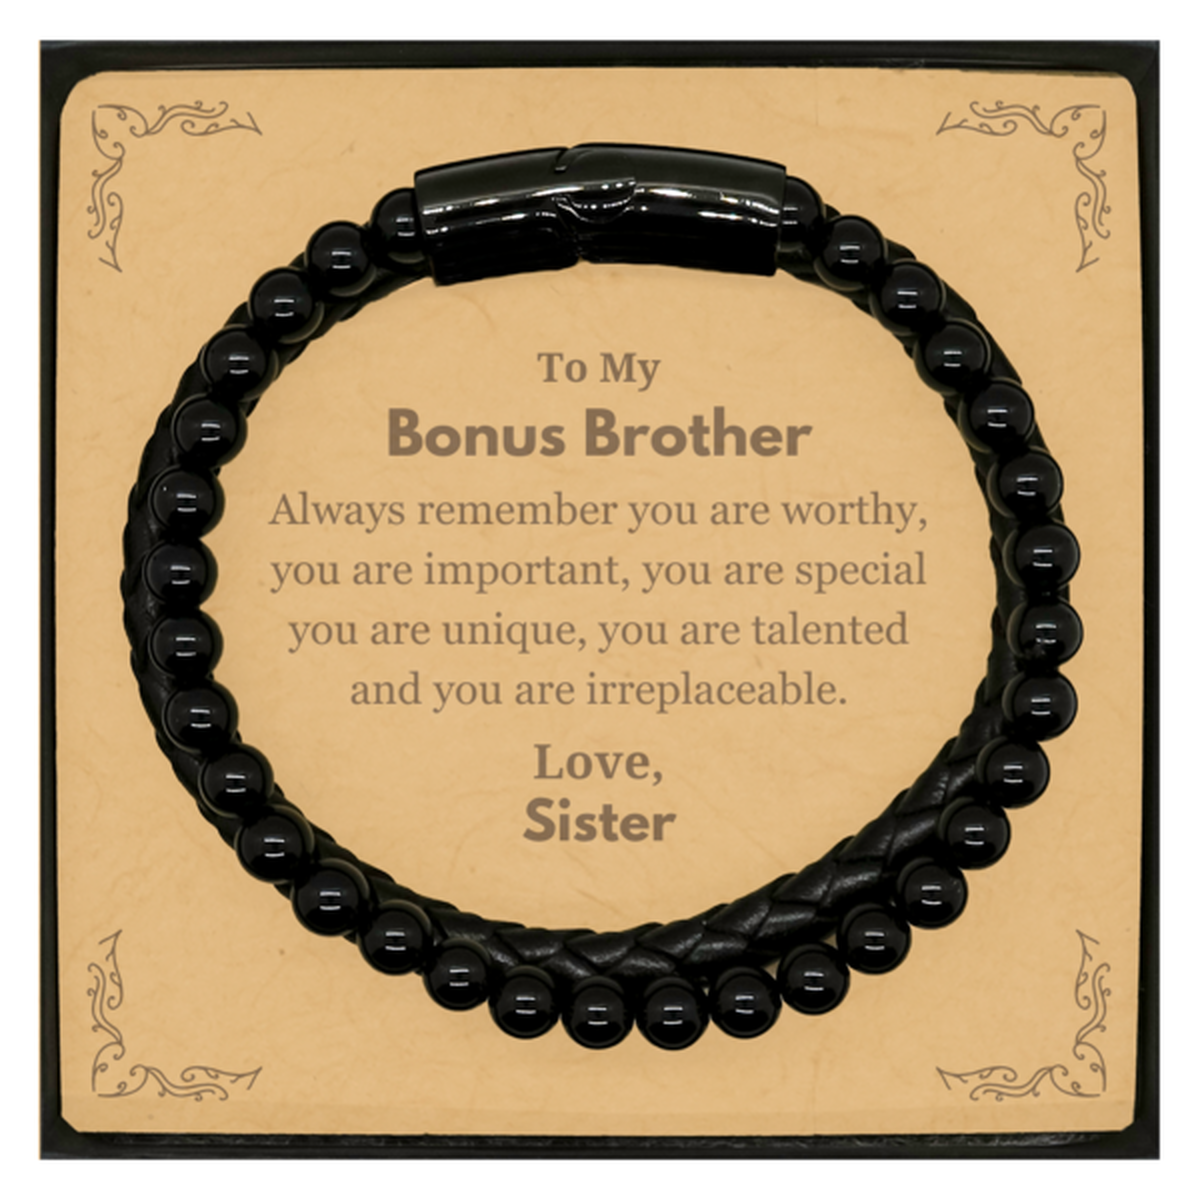 Bonus Brother Birthday Gifts from Sister, Inspirational Stone Leather Bracelets for Bonus Brother Christmas Graduation Gifts for Bonus Brother Always remember you are worthy, you are important. Love, Sister